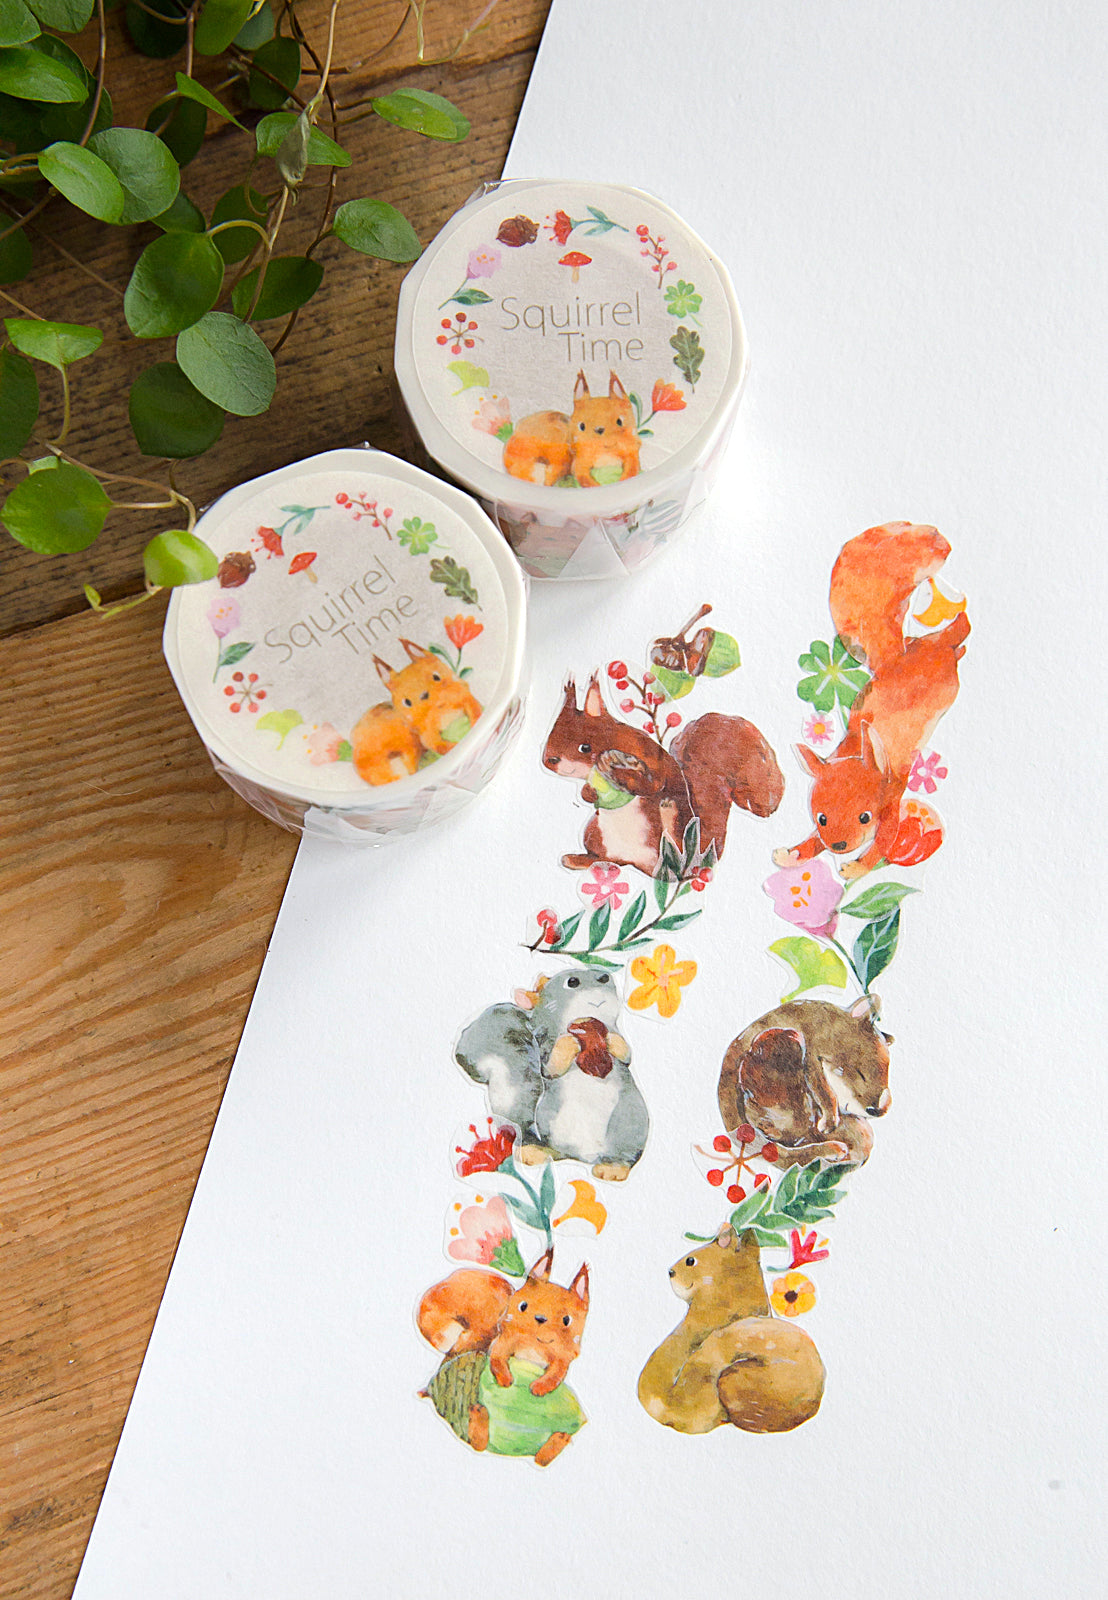 OURS Squirrel Time Washi Tape